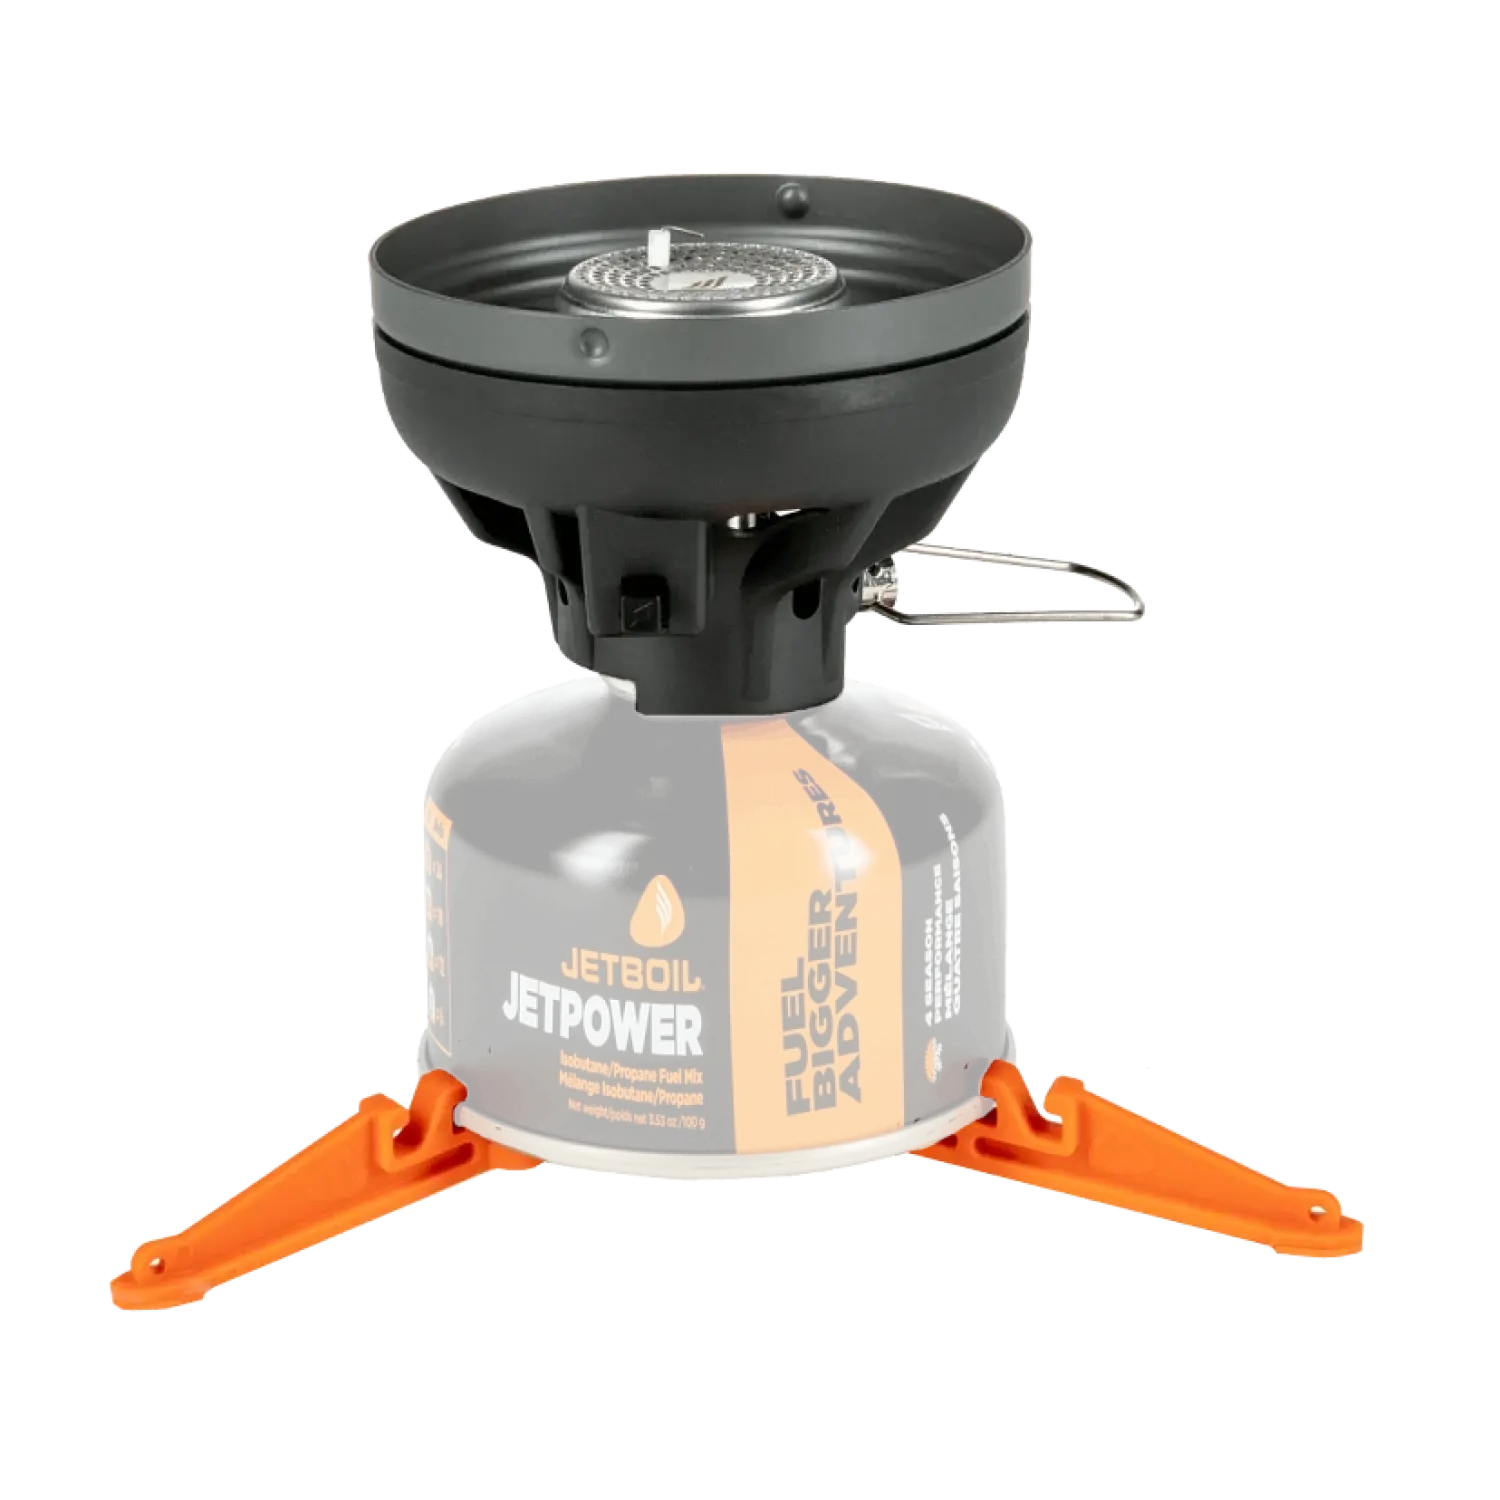 Jetboil Flash Cooking System shown with base. (Fuel canister not included)